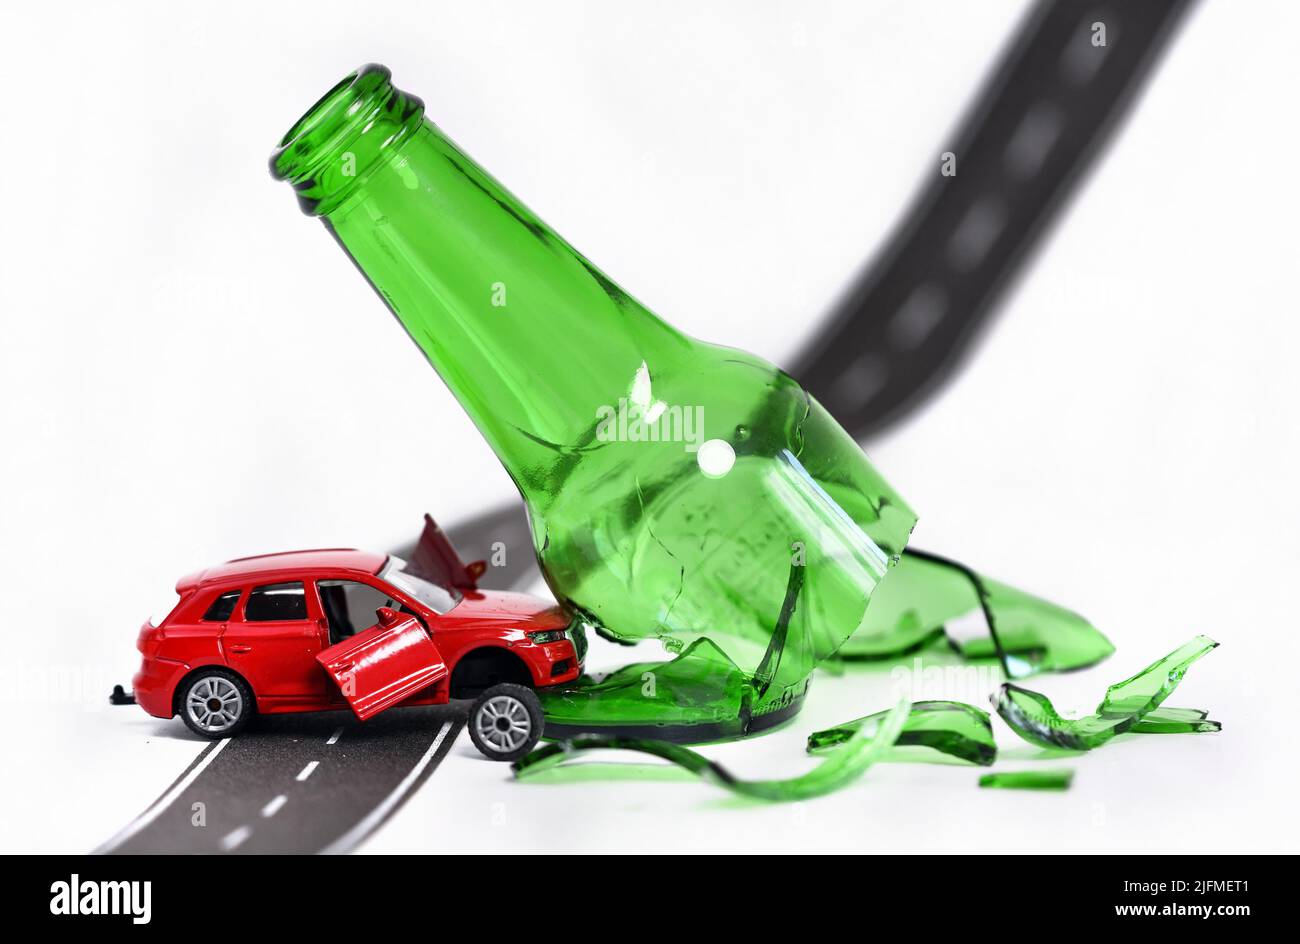 toy car crash accident with beer glass bottle Stock Photo